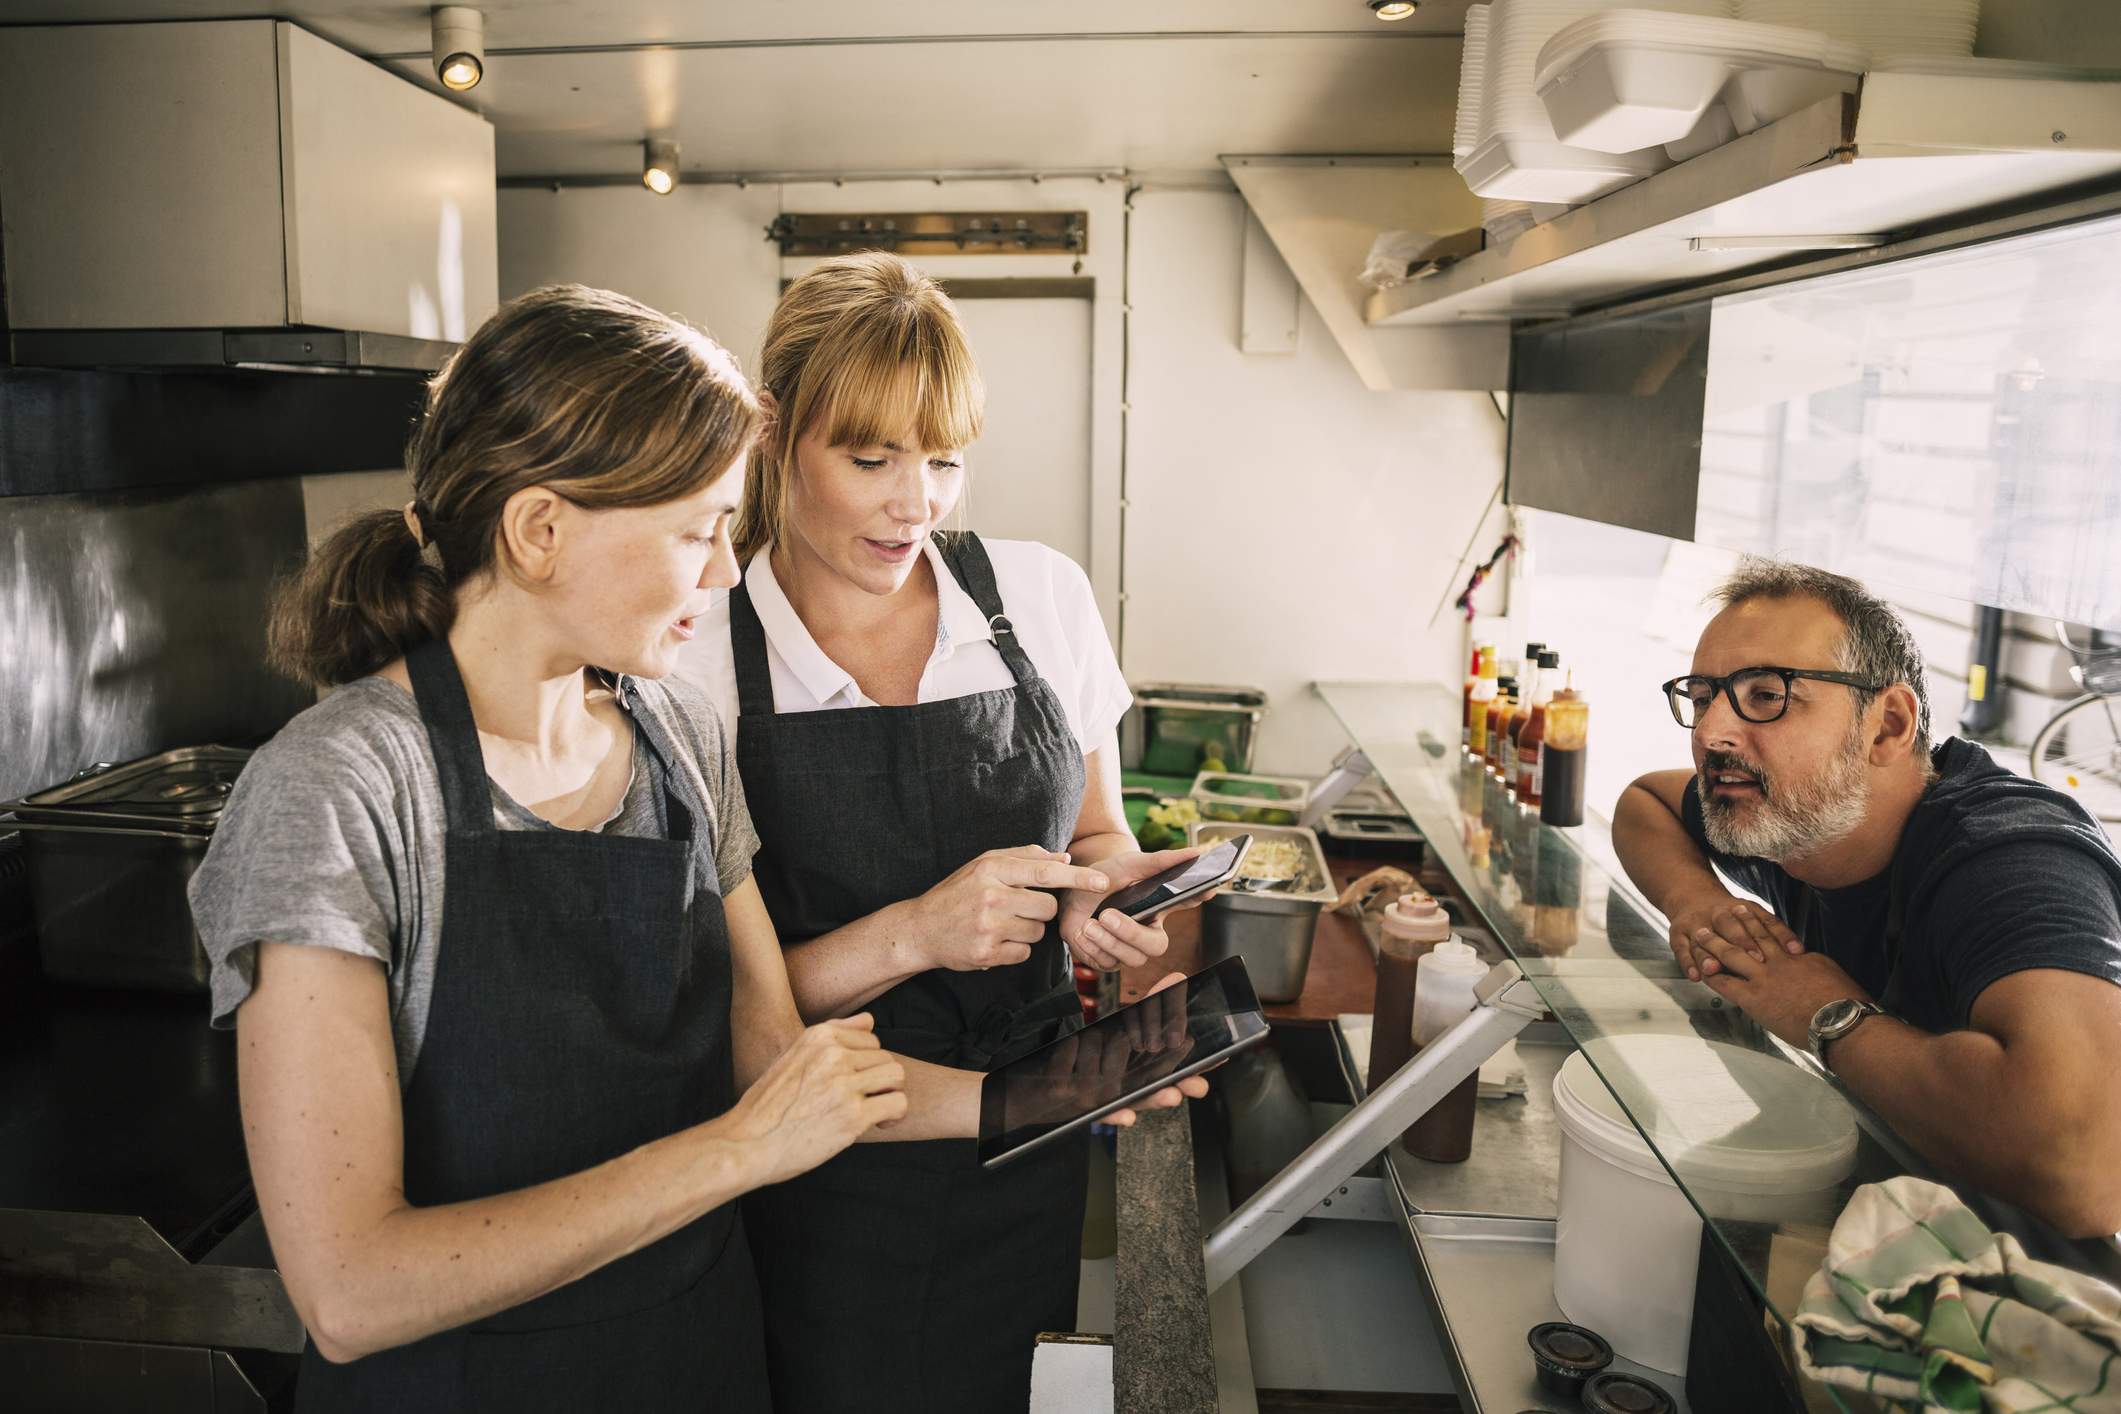 Image depicts two servers standing behind a counter. One, wearing a white polo shirt and black apron, is showing the other something on a phone. The other, dressed in a gray t-shirt and black apron, is holding a tablet. There is another worker wearing black rimmed glasses leaning over the counter. 